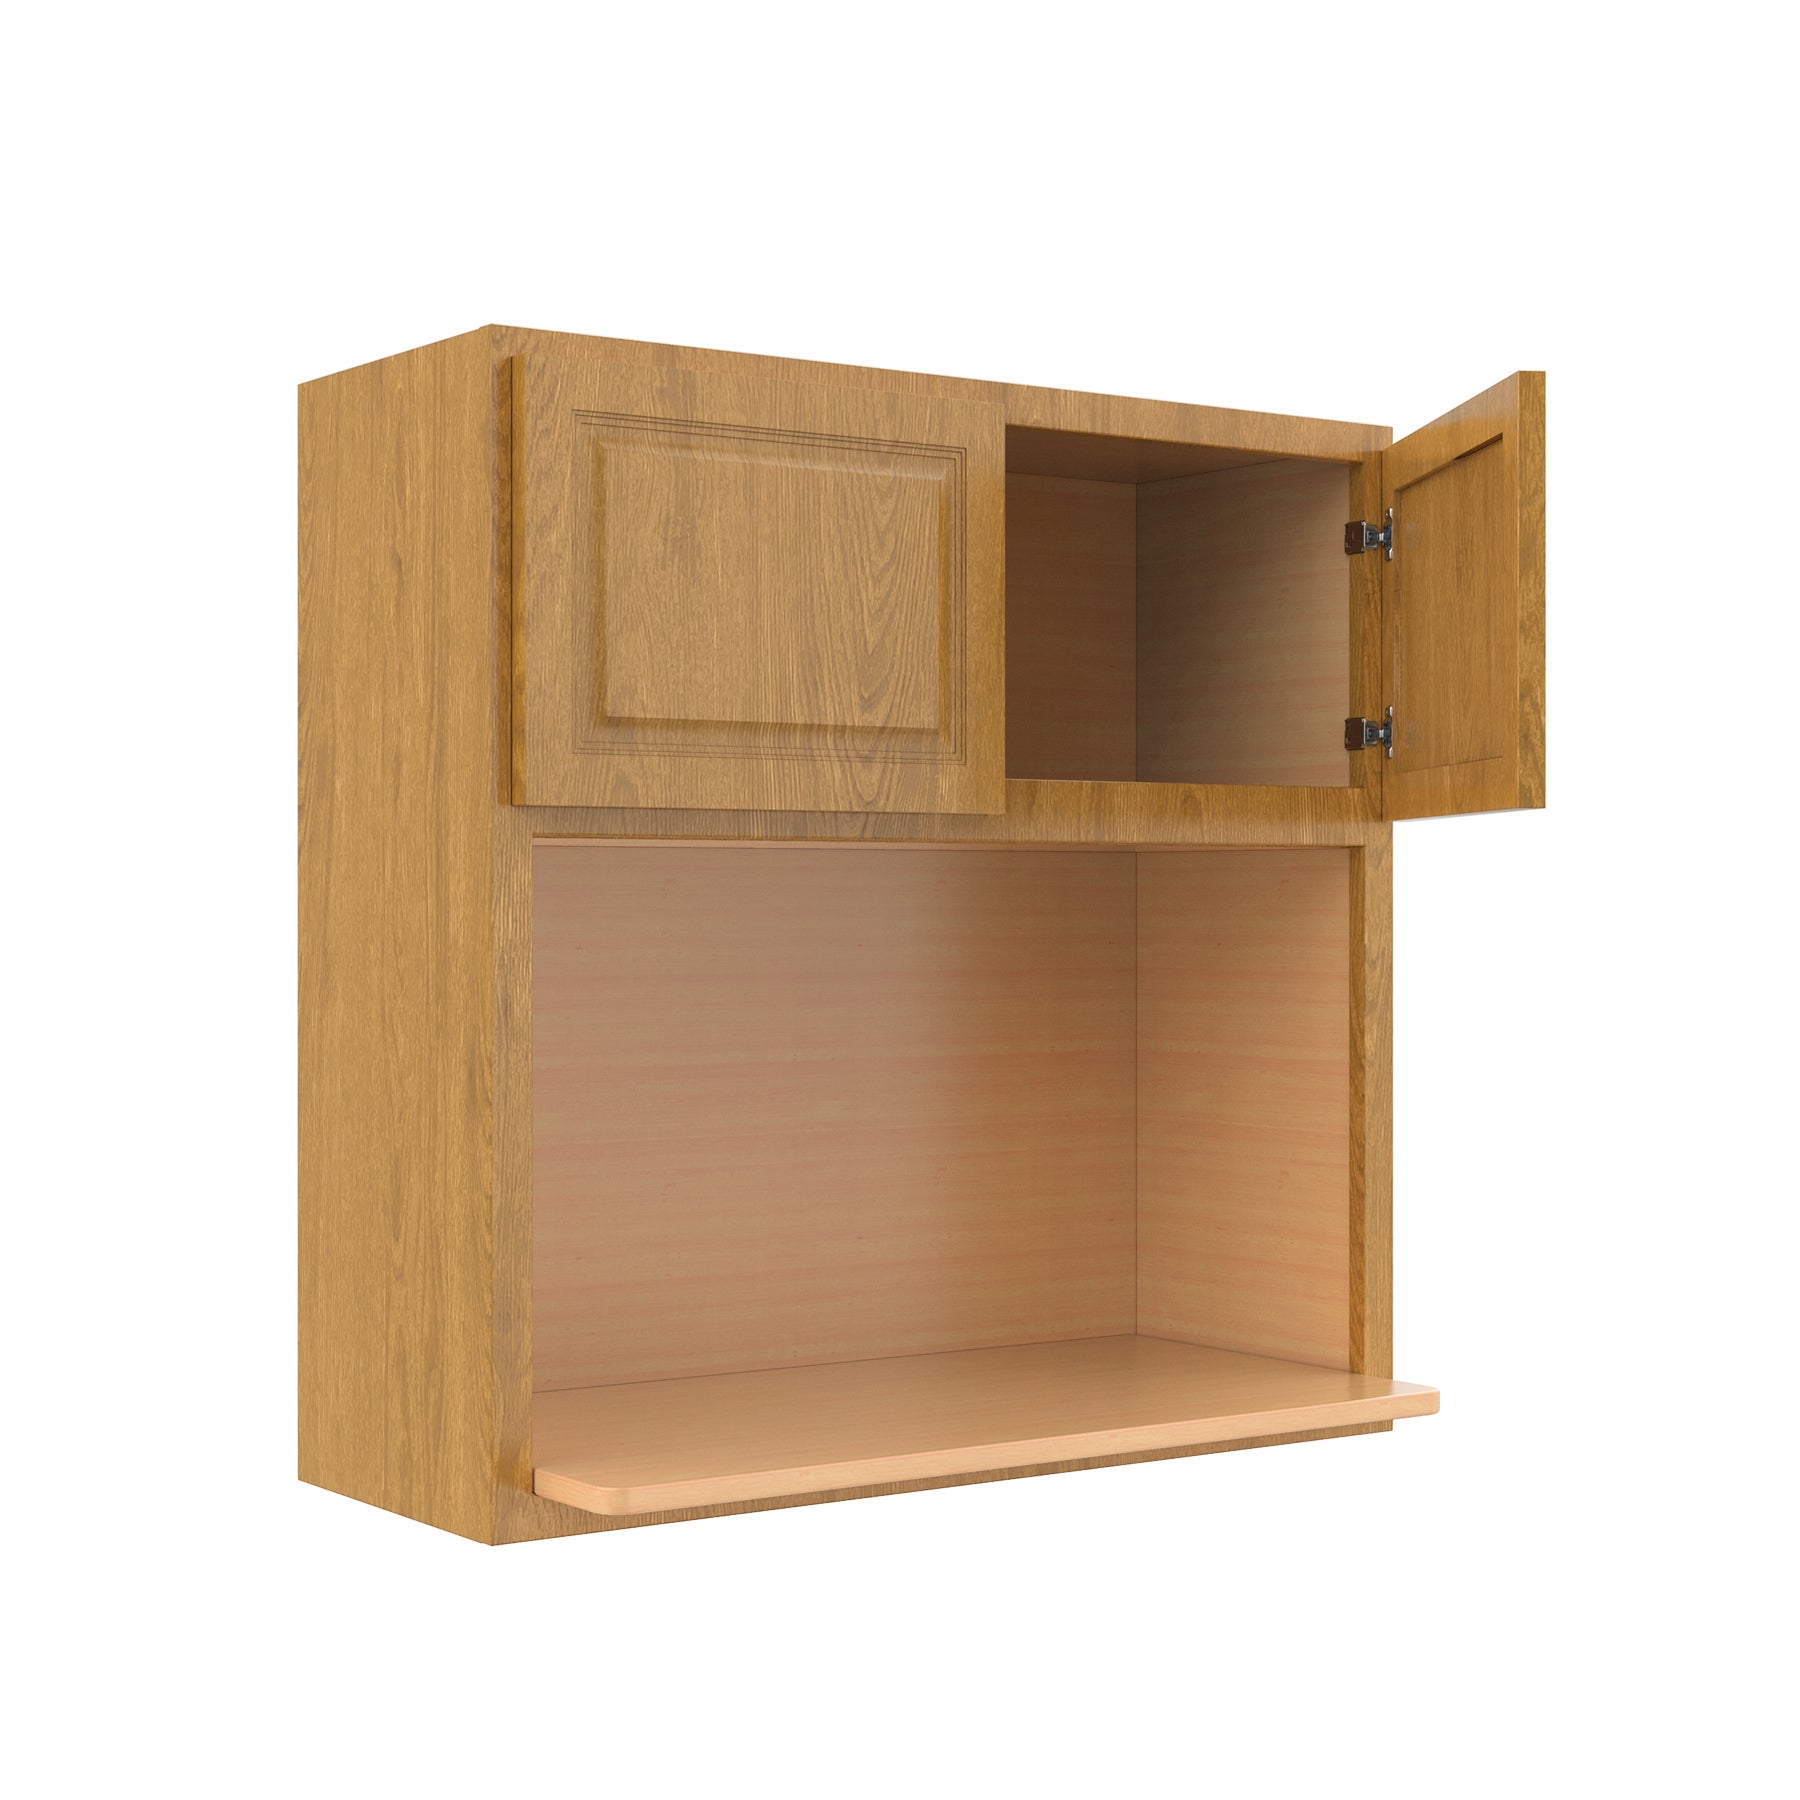 Country Oak 30"W x 30"H Microwave Wall Cabinet